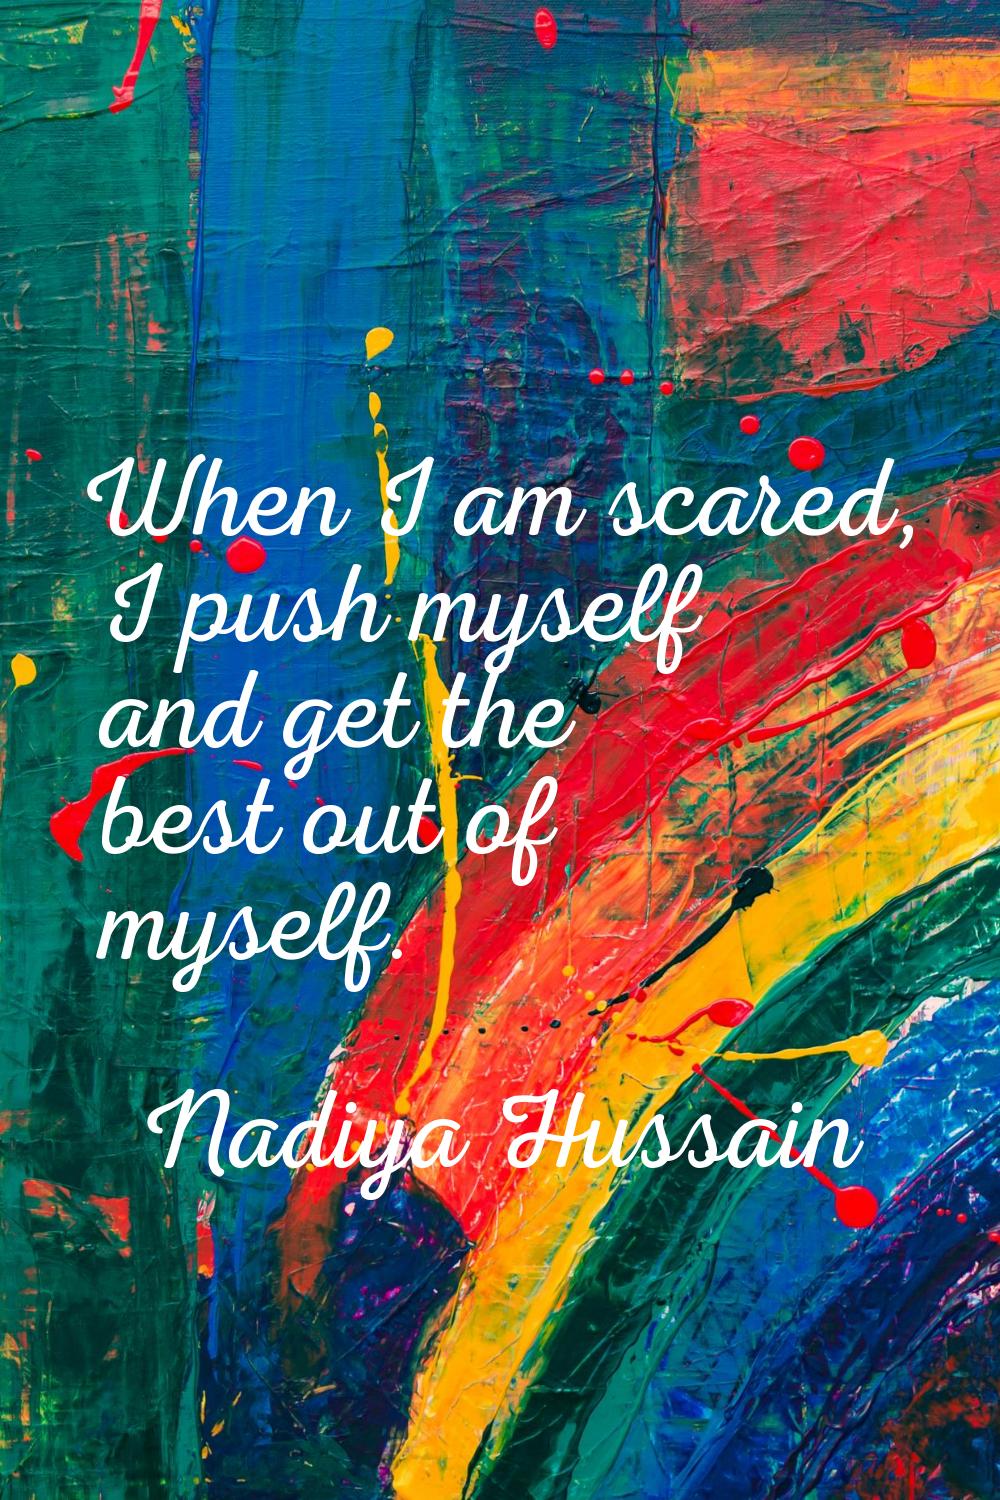 When I am scared, I push myself and get the best out of myself.